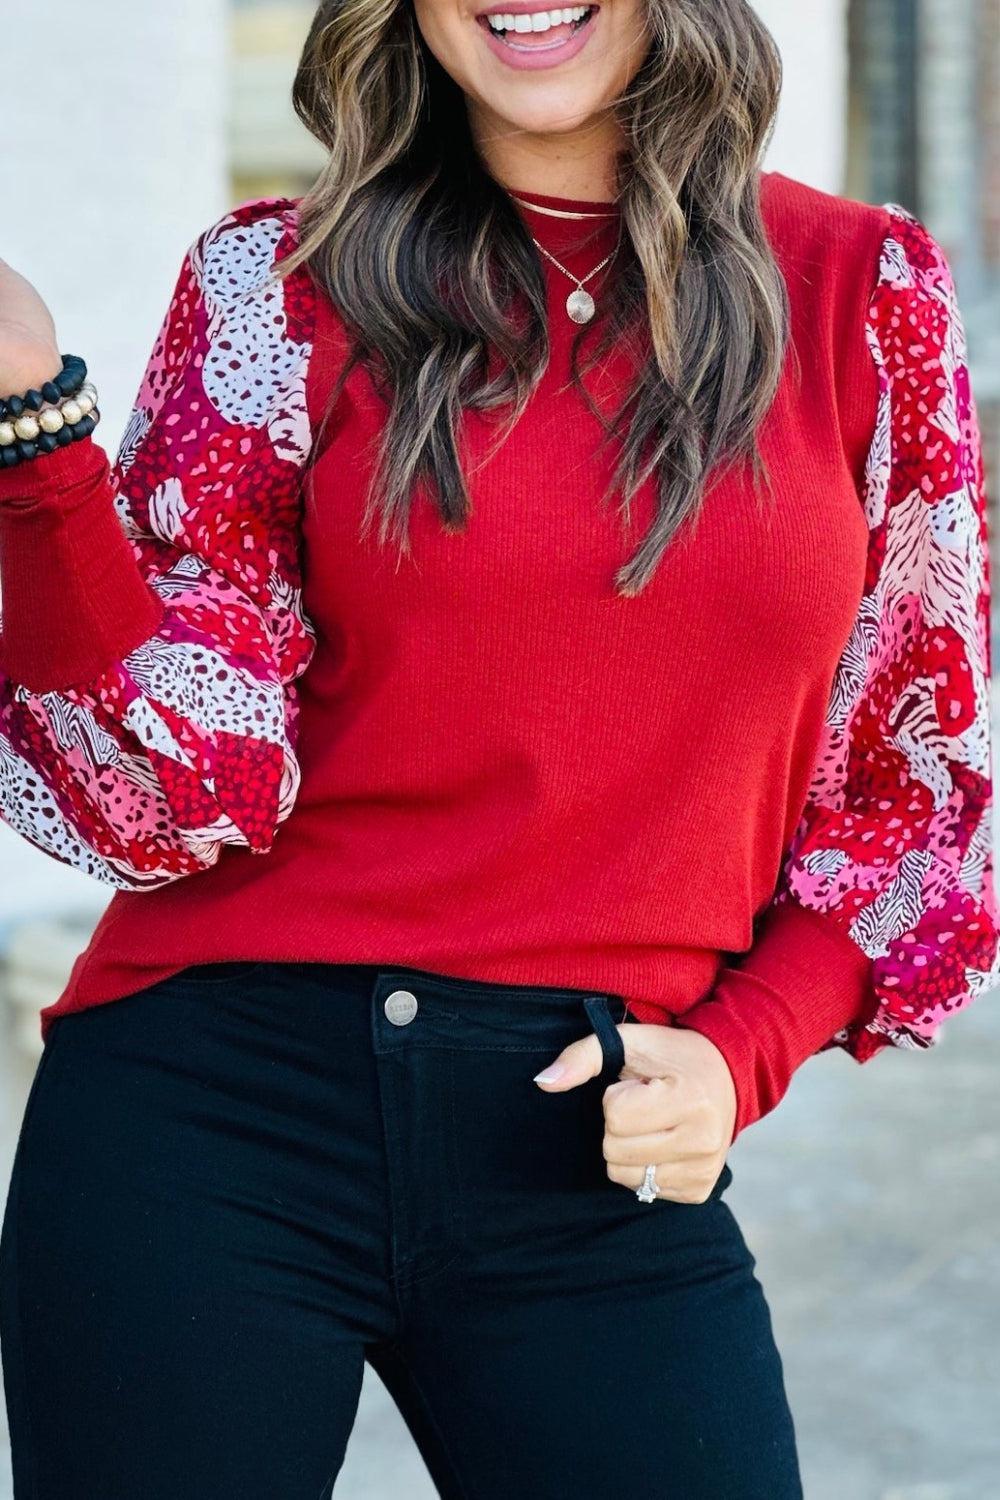 a woman wearing a red sweater and black pants